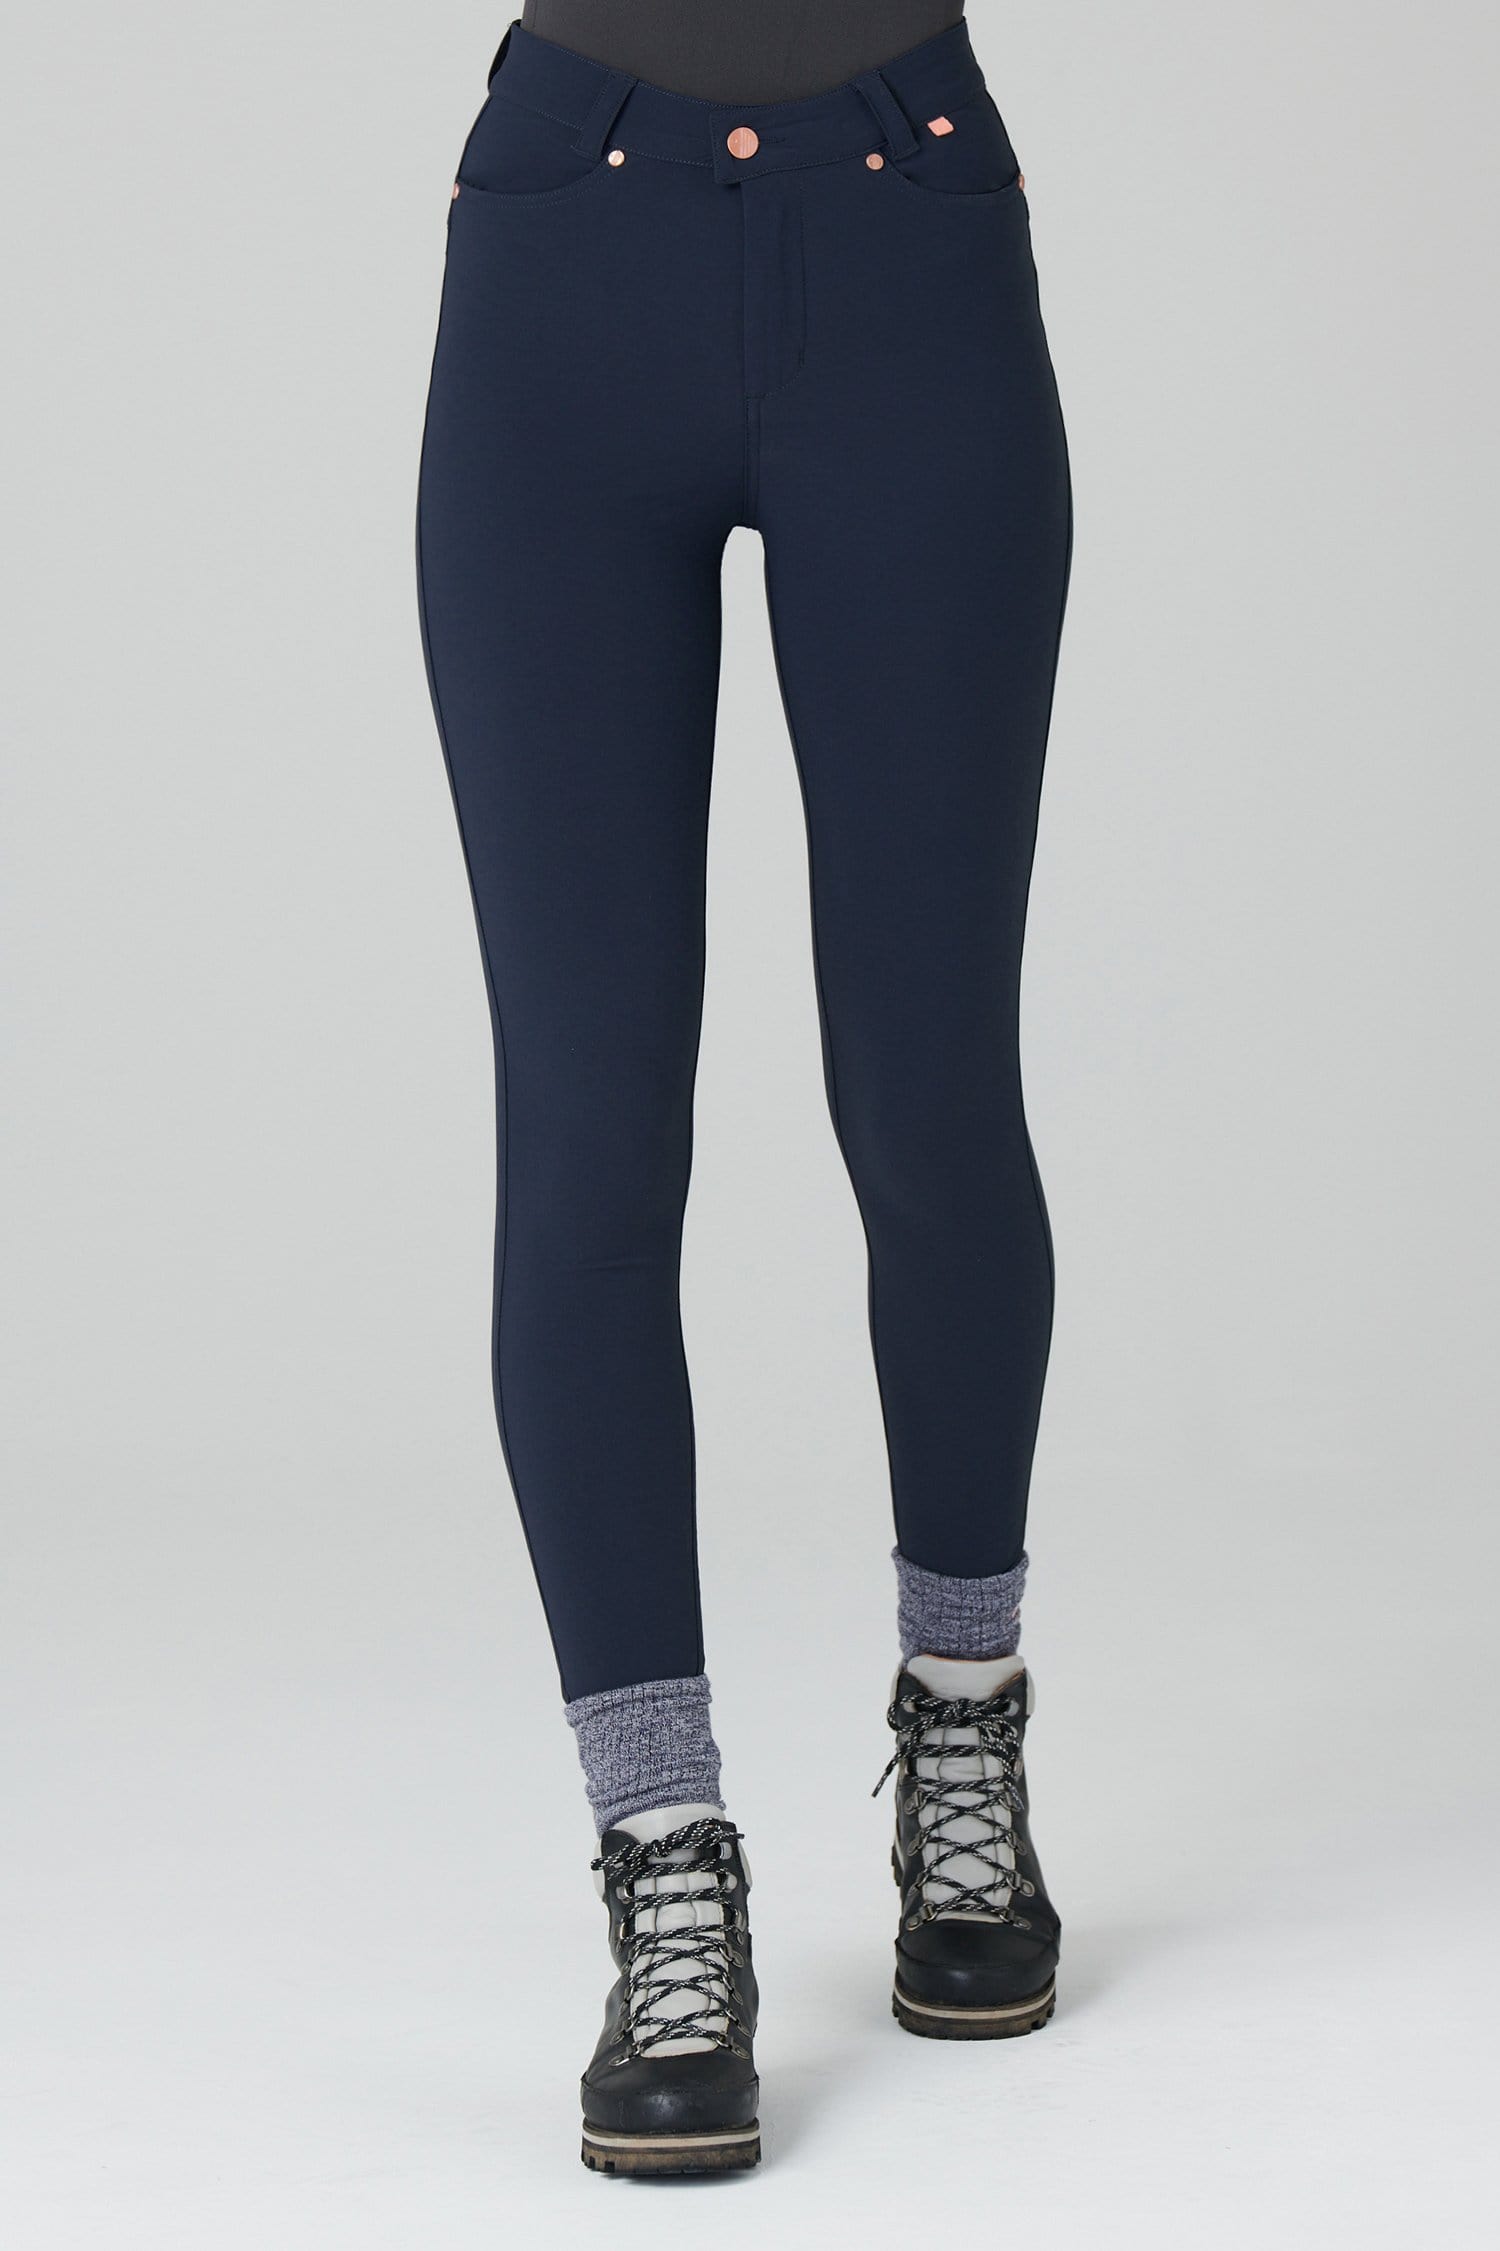 Thermal Skinny Outdoor Trousers - Deep Navy - 26xl / Uk8 - Womens - Acai Outdoorwear